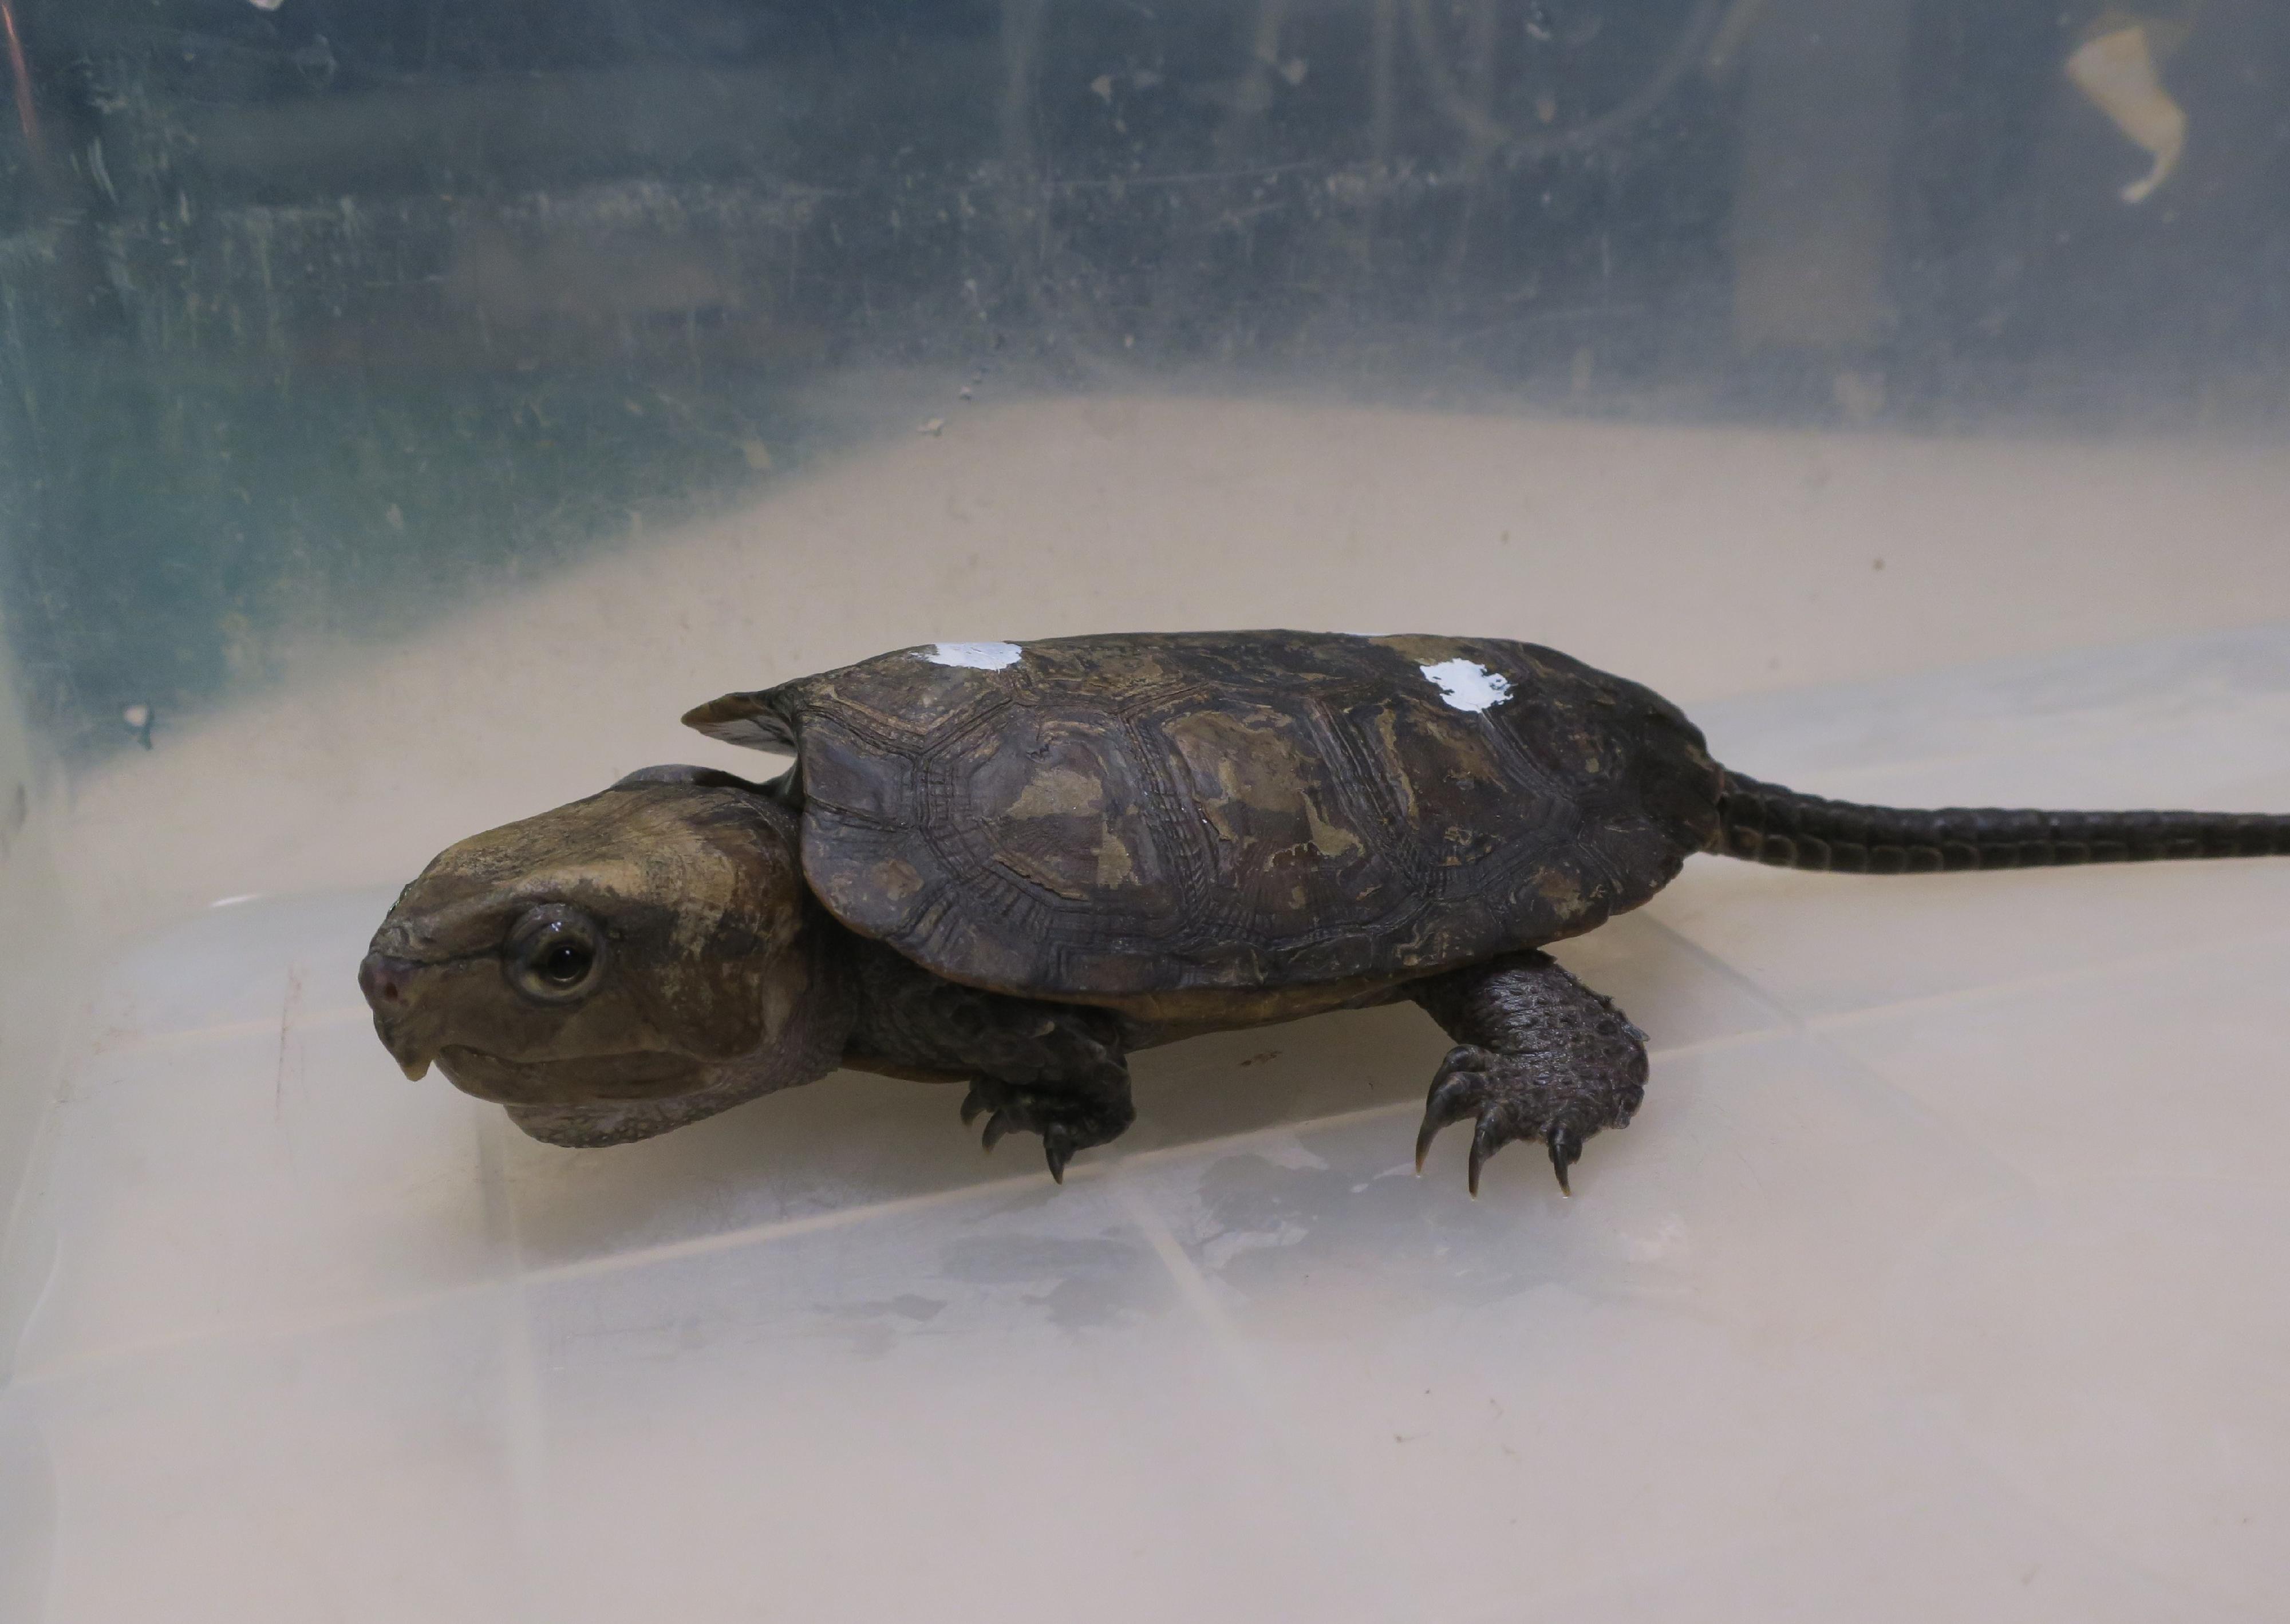 The Agriculture, Fisheries and Conservation Department (AFCD) seized eight endangered freshwater turtles suspected to be illegally possessed in an inspection operation yesterday (April 7). Photo shows a big-headed turtle which is suspected to be poached in Hong Kong and seized by AFCD staff.